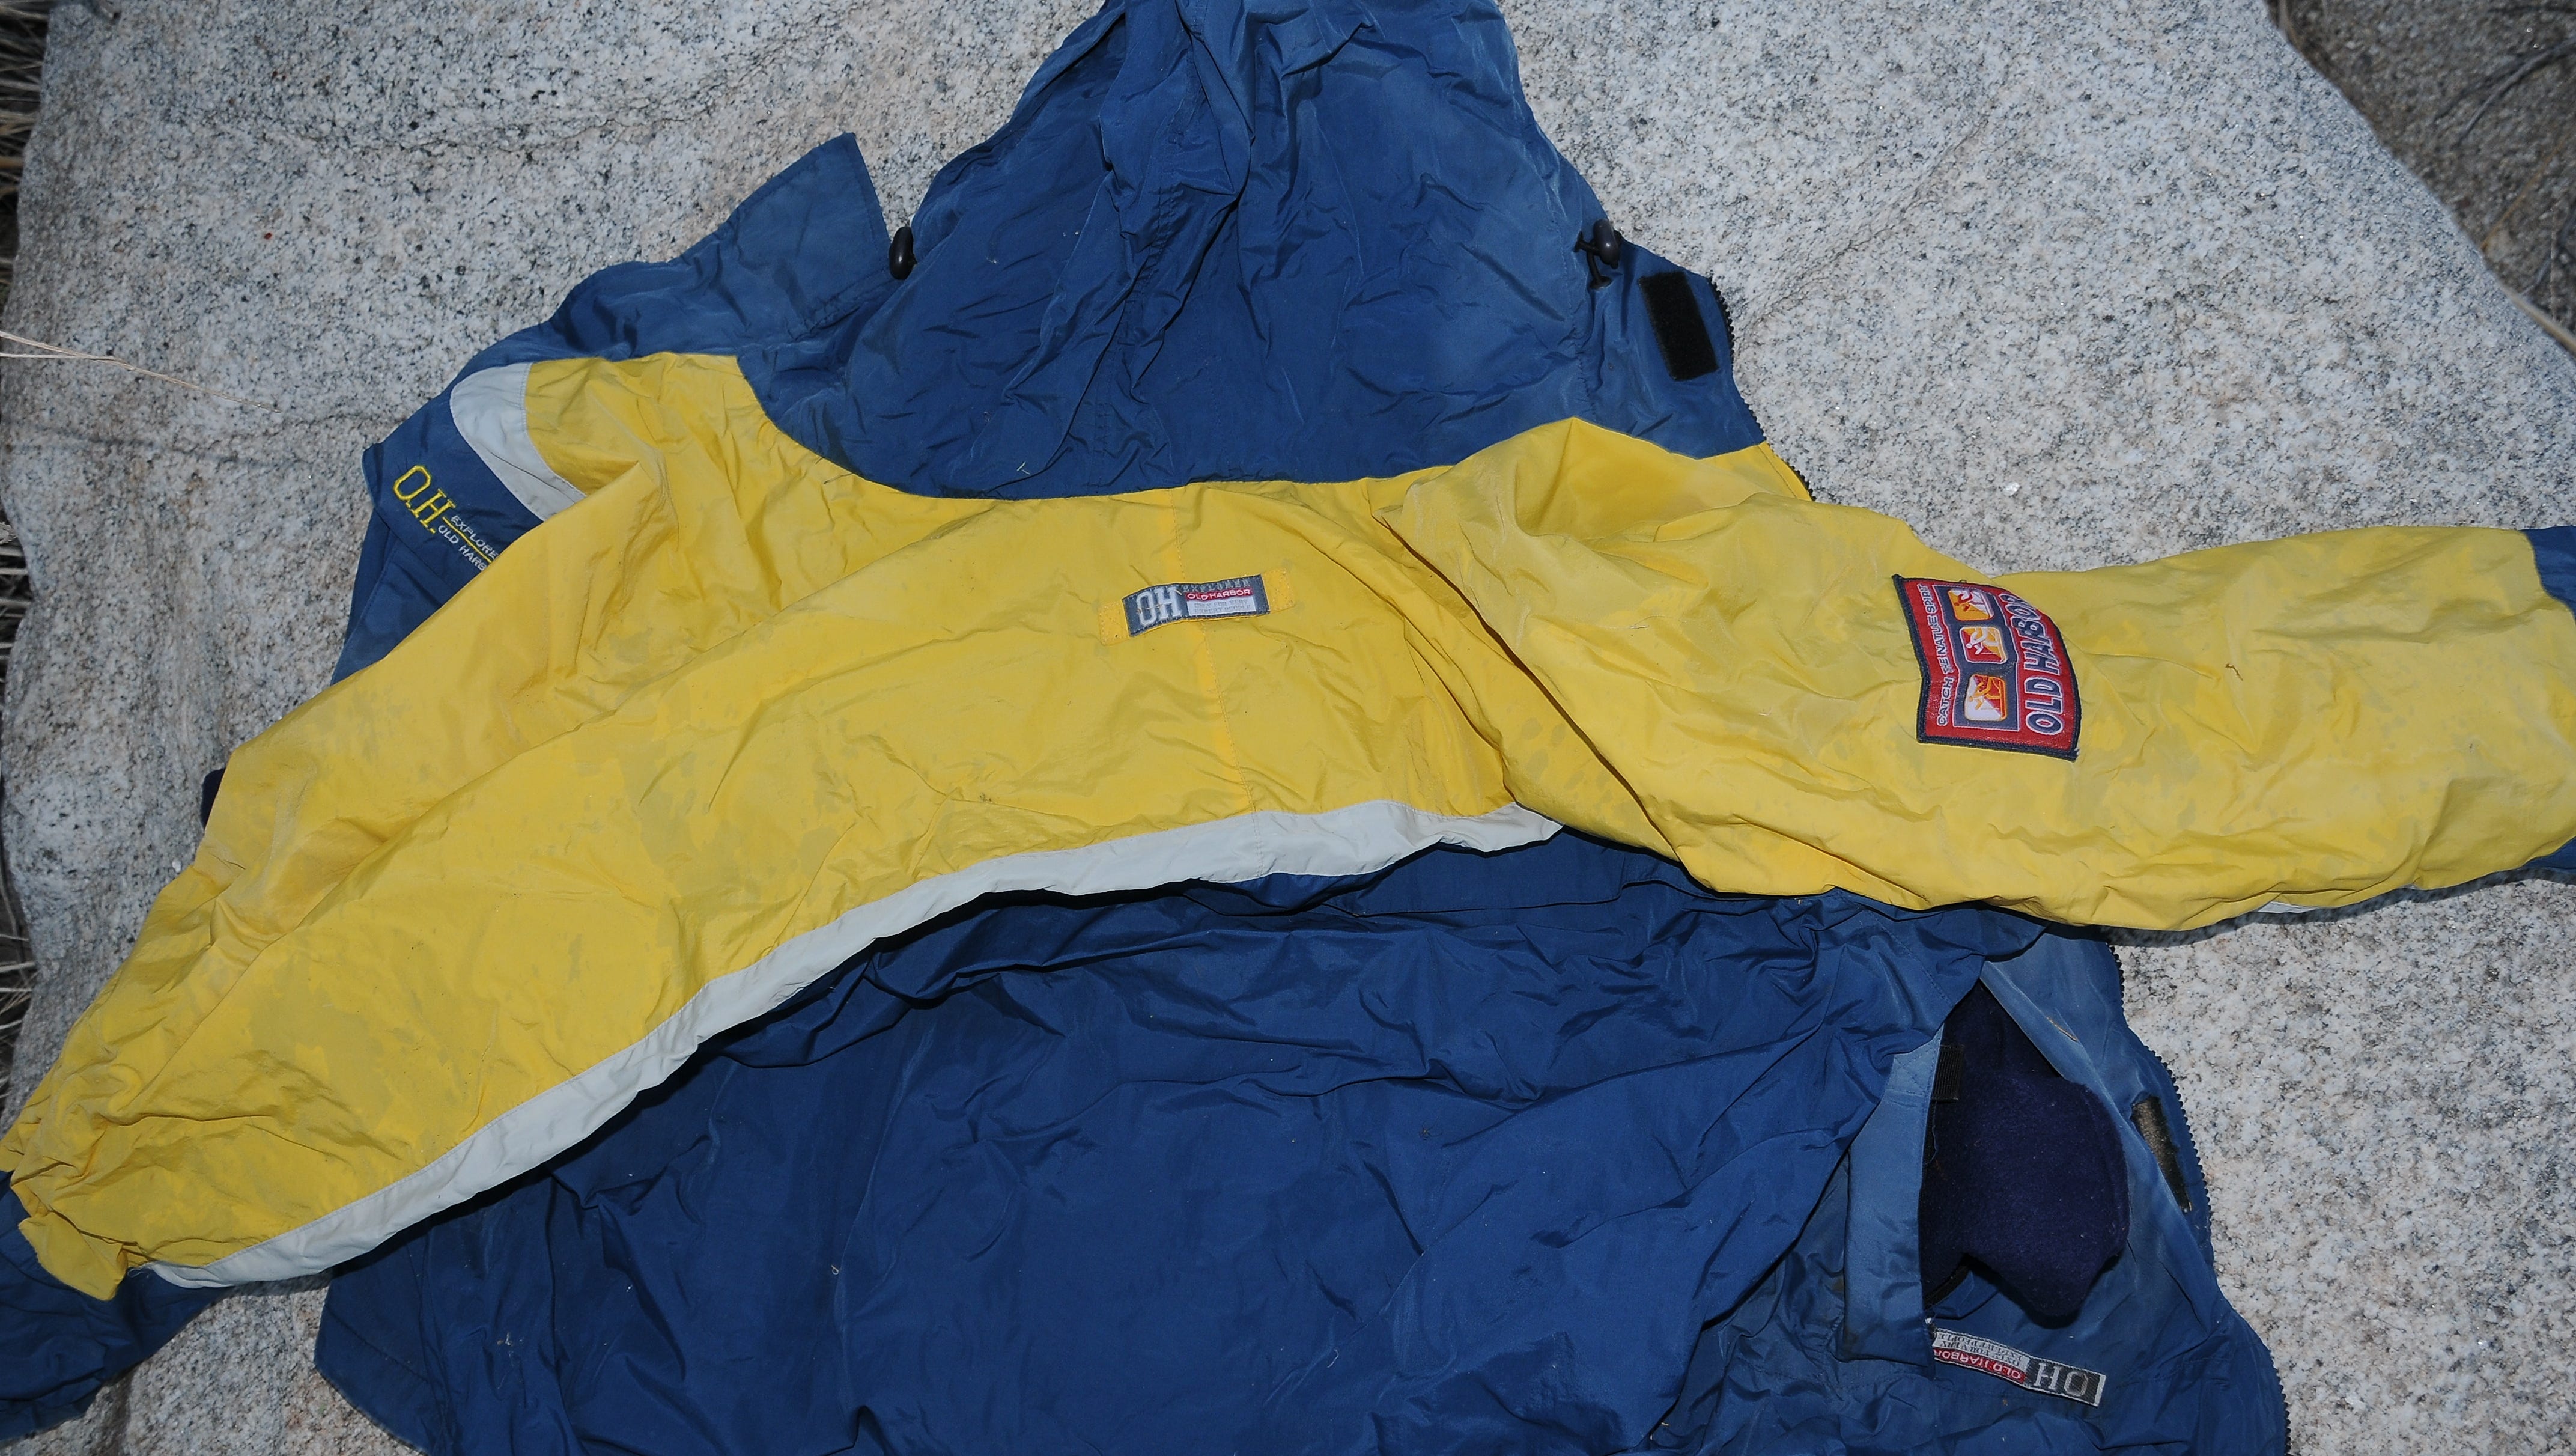 A jacket located with the body of a Latino man who was found near Ocotillo, CA on Dec. 9, 2012. Photo from John Doe Case #12-202.